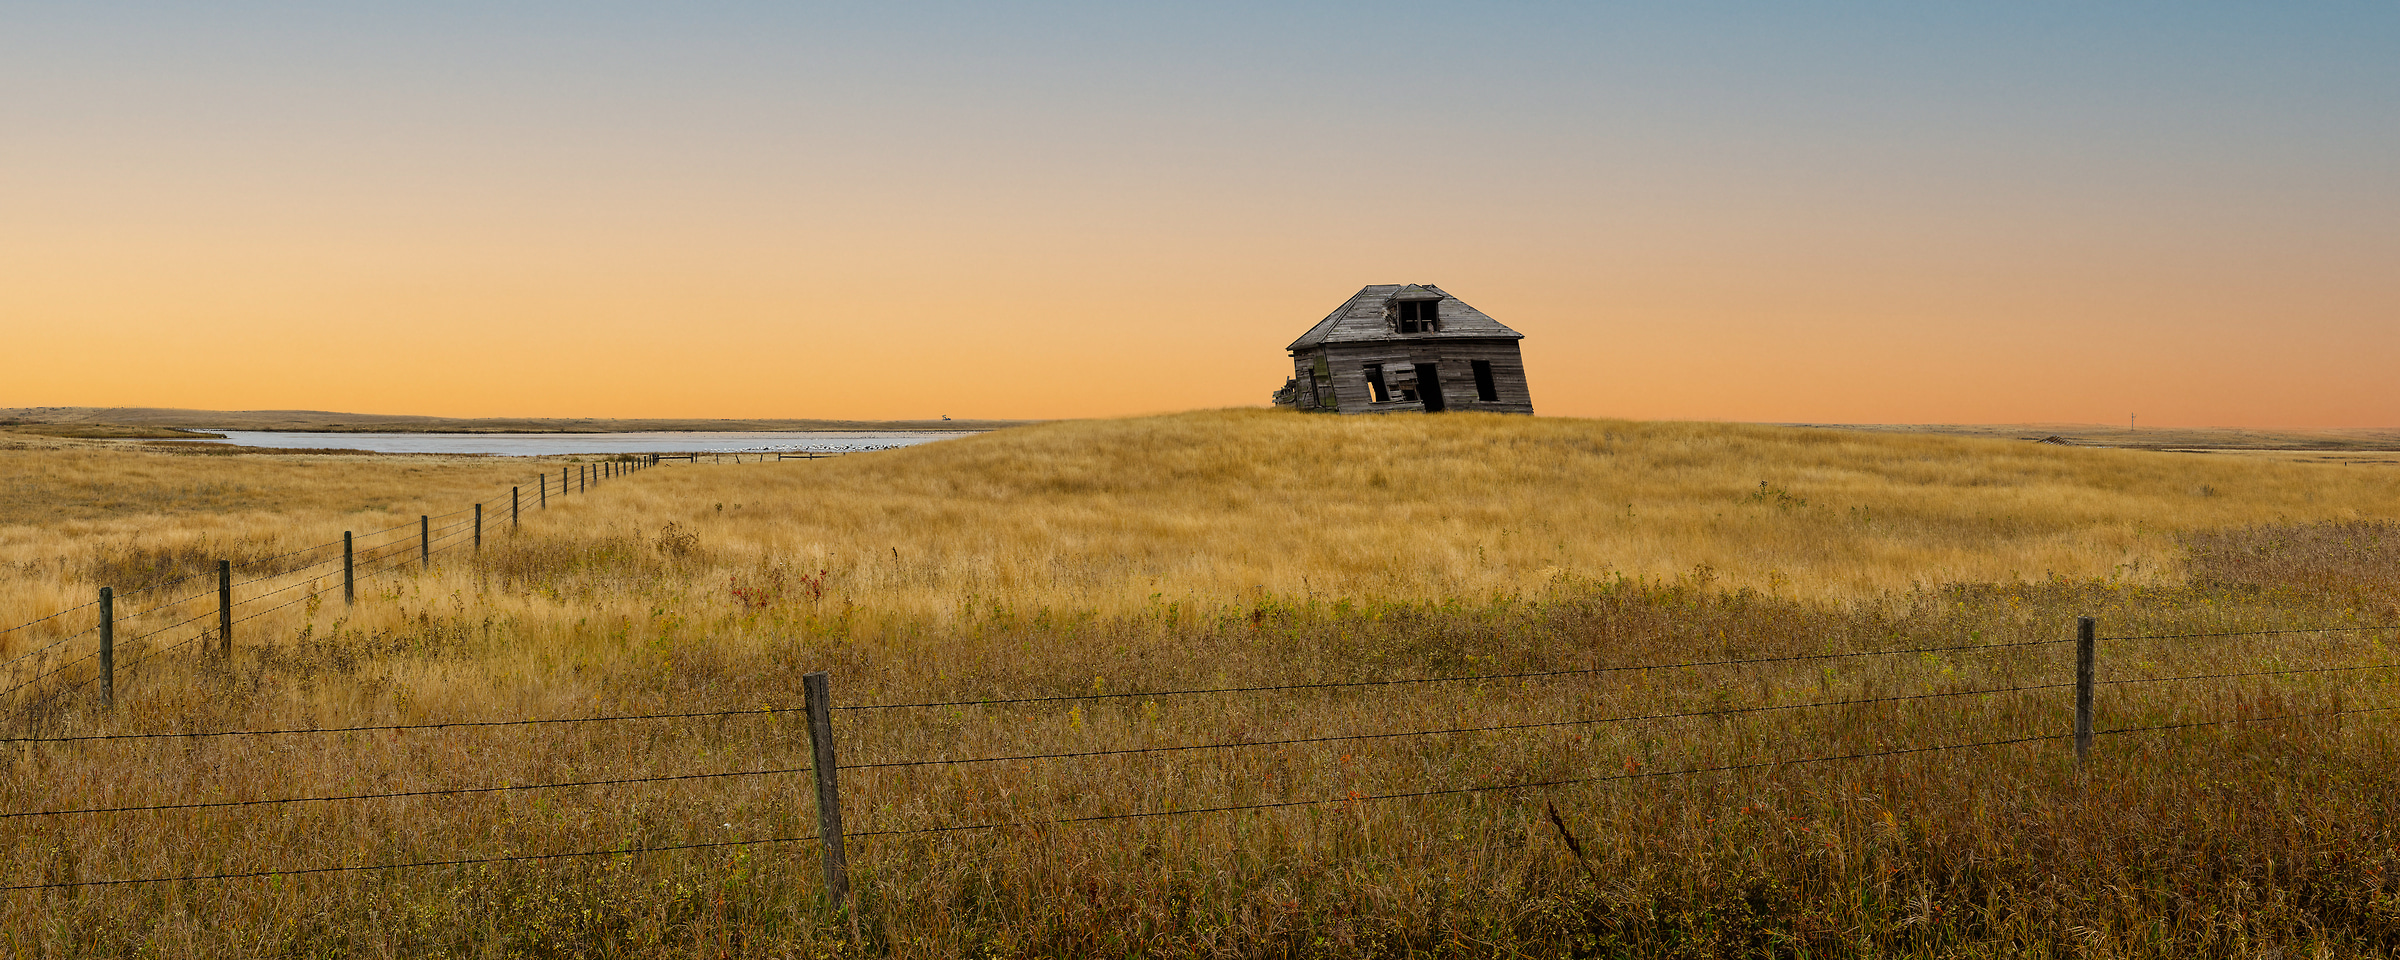 863 megapixels! A very high resolution, large-format VAST photo print of an abandoned house in a field at sunrise; landscape photograph created by Scott Dimond in Vulcan County, Alberta, Canada.